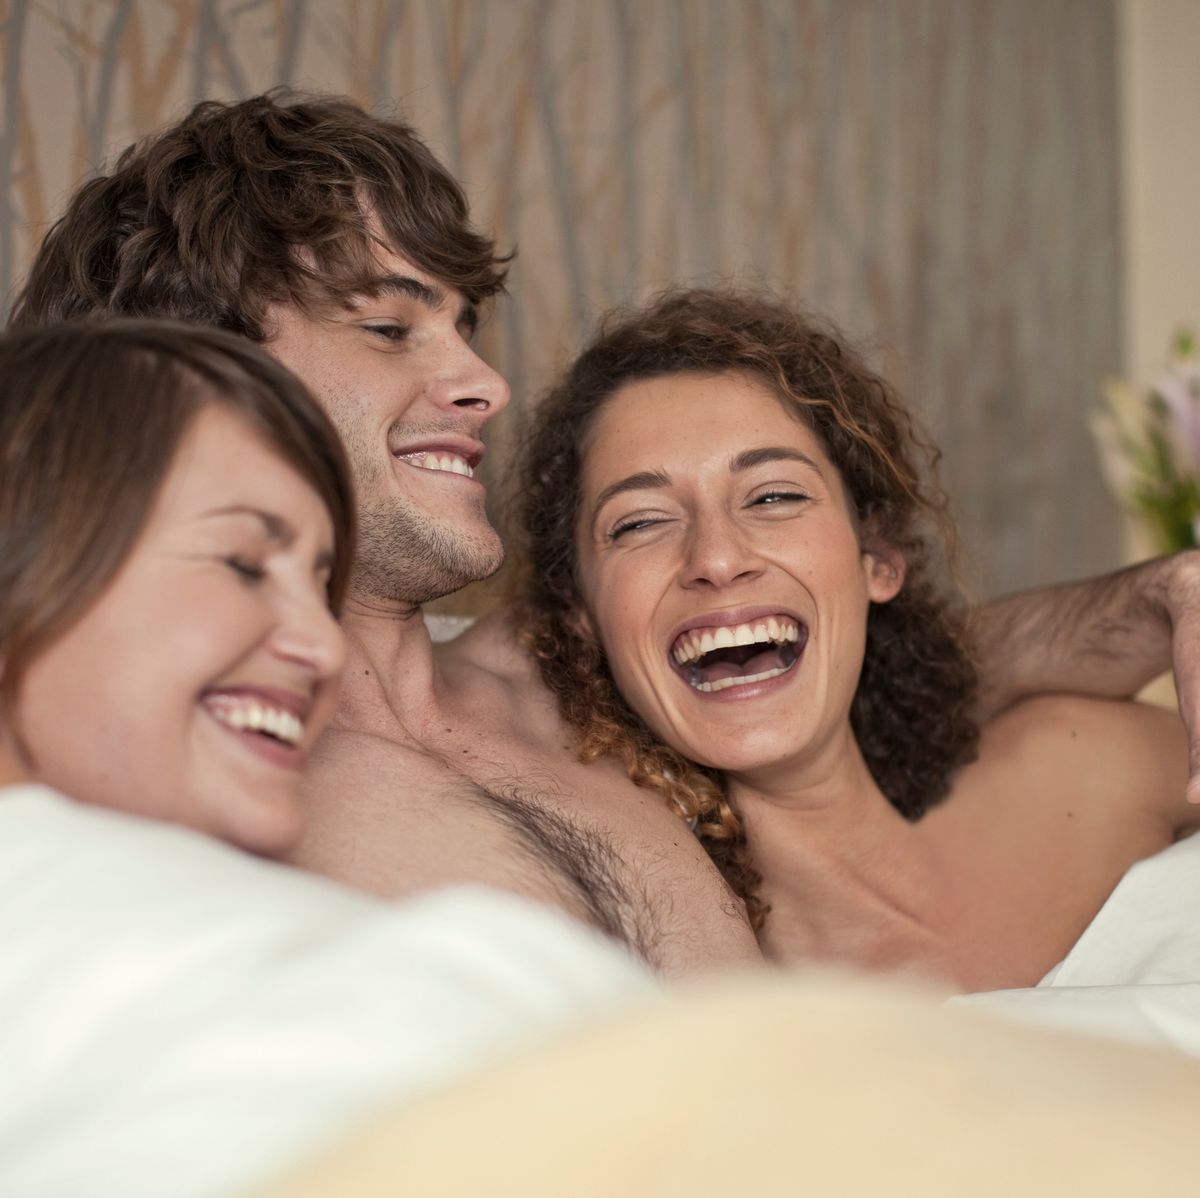 Bisexual Threesome Positions - 10 Threesome Sex Positions That Are Super Hot and Totally Doable